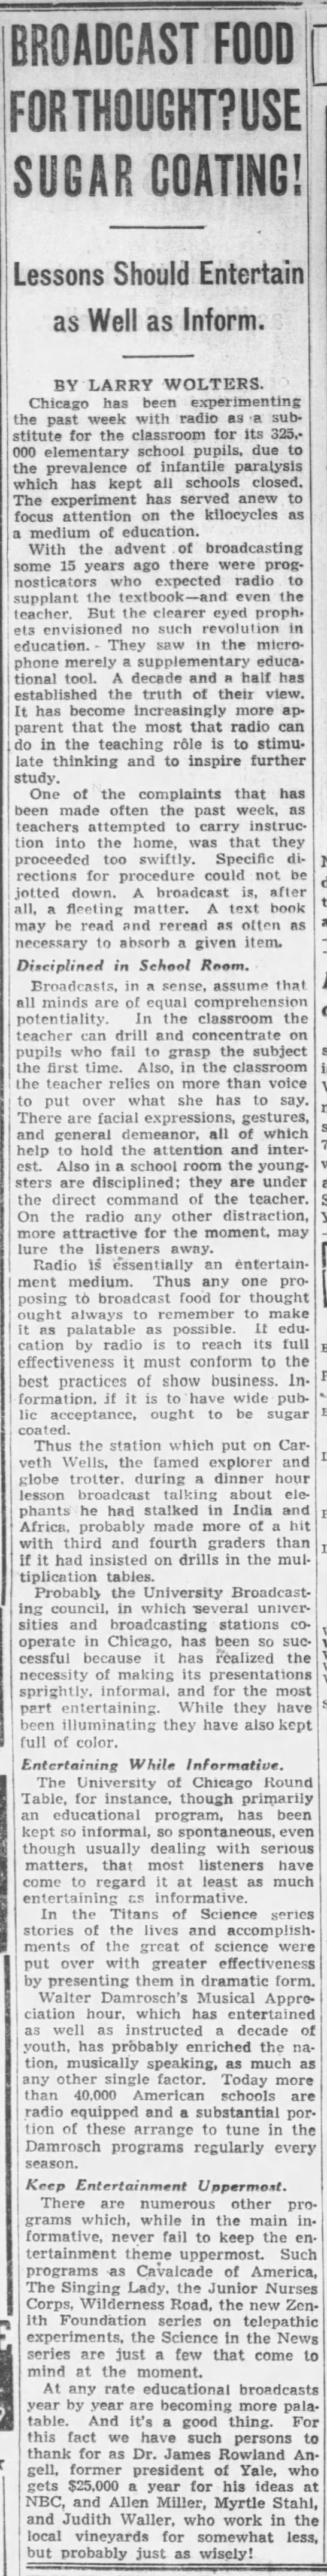 Broadcast Food for Thought? Chicago Tribune. 9.19.1937 - 